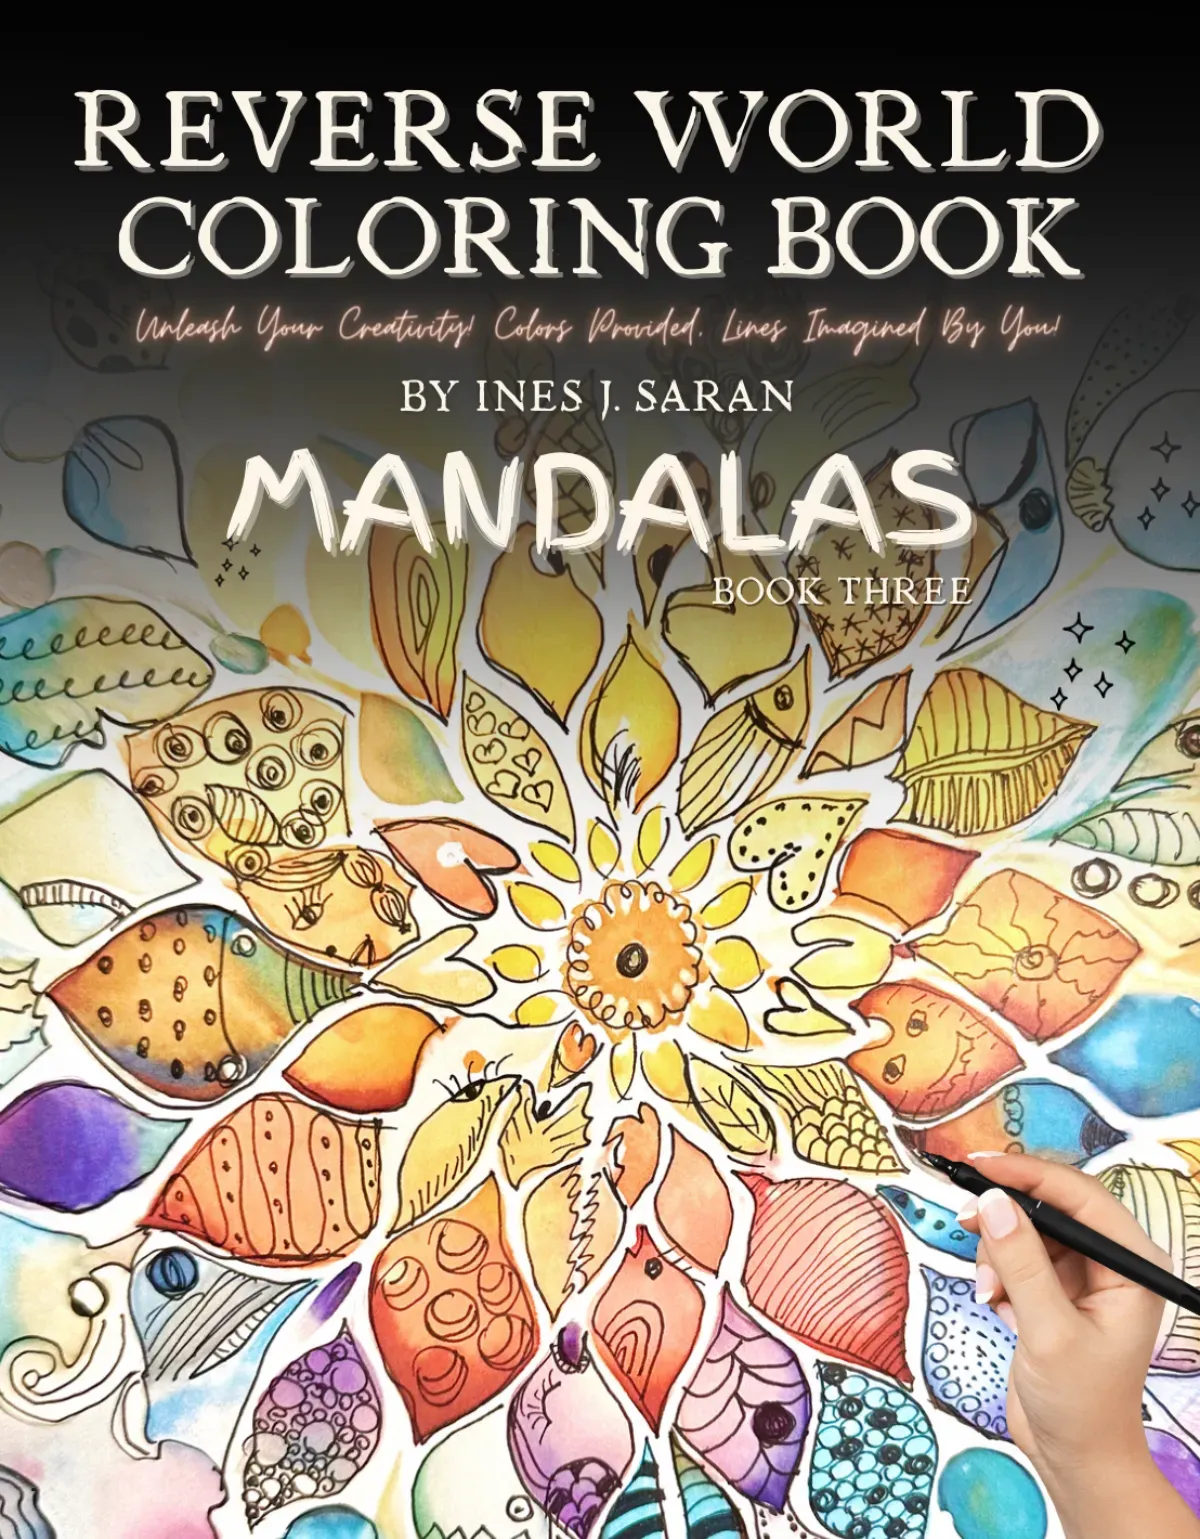 Reverse Coloring Book: 35 Matte Tropical Watercolor Pages For Adults To  Express Your Weird, Unique and Whimsical Doodling For Mindless Relaxation  by TriggMo Magazine